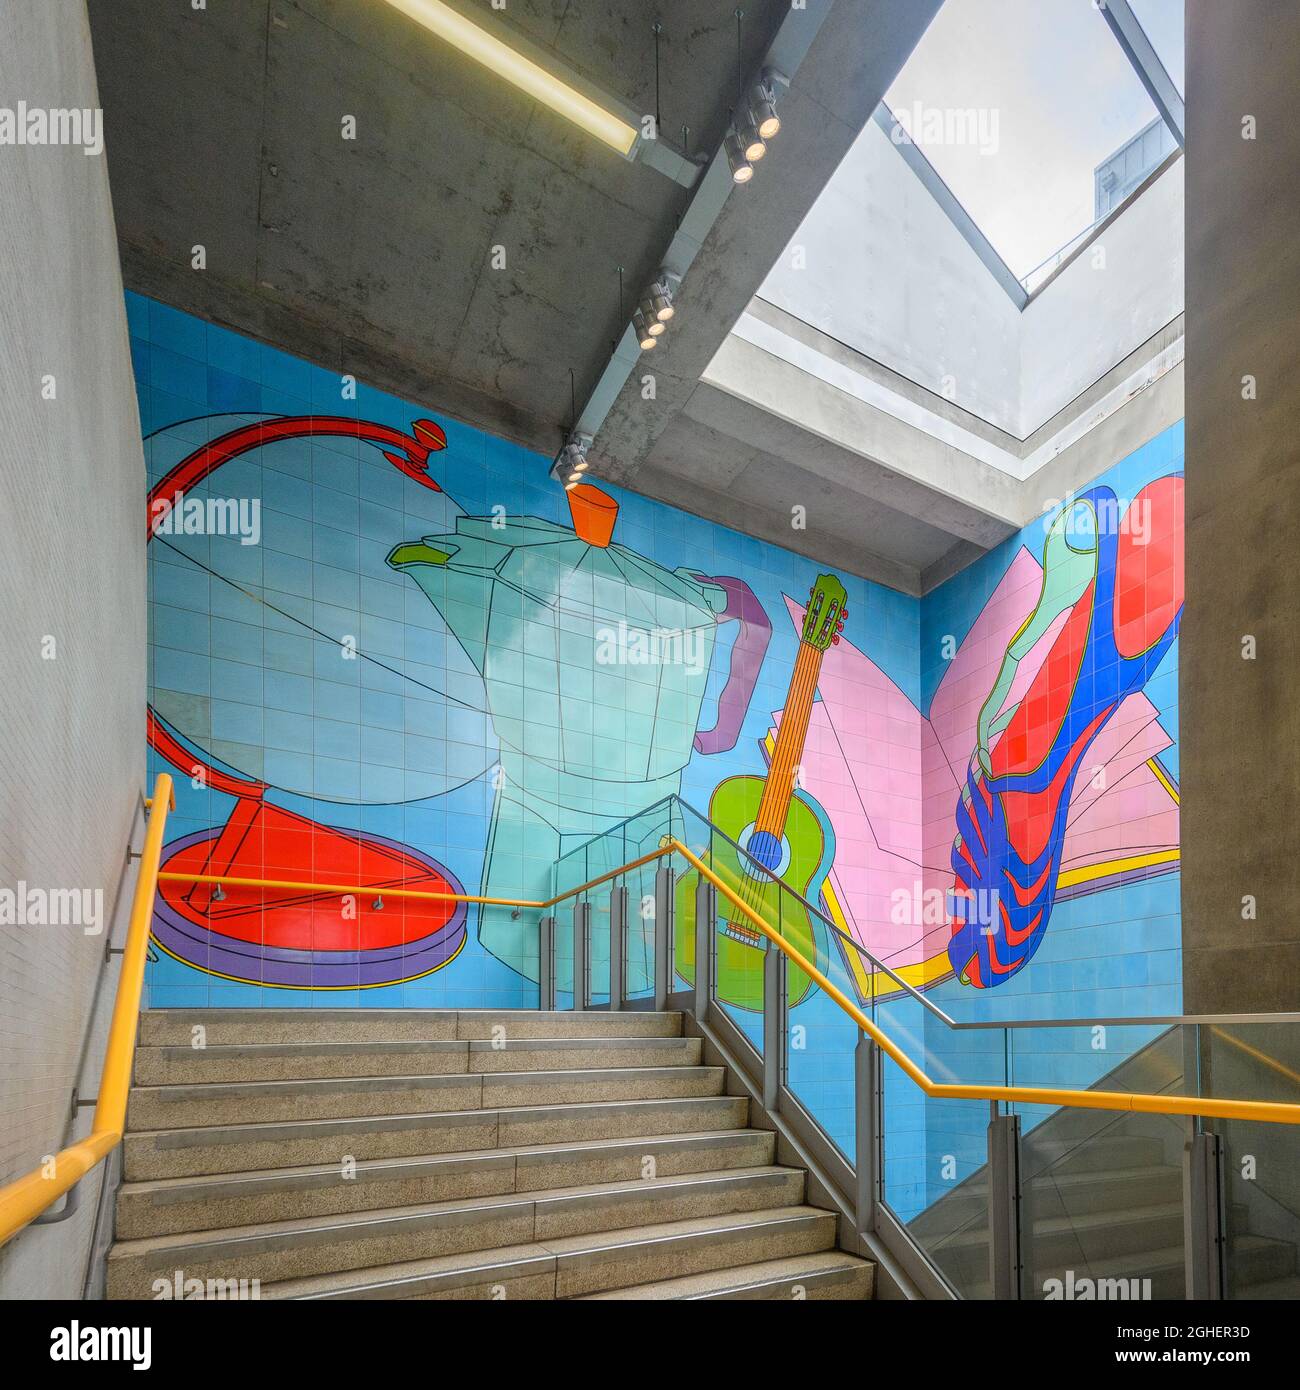 London, England, UK - Street Life ceramic mural at Woolwich Arsenal DLR station by Michael Craig-Martin Stock Photo